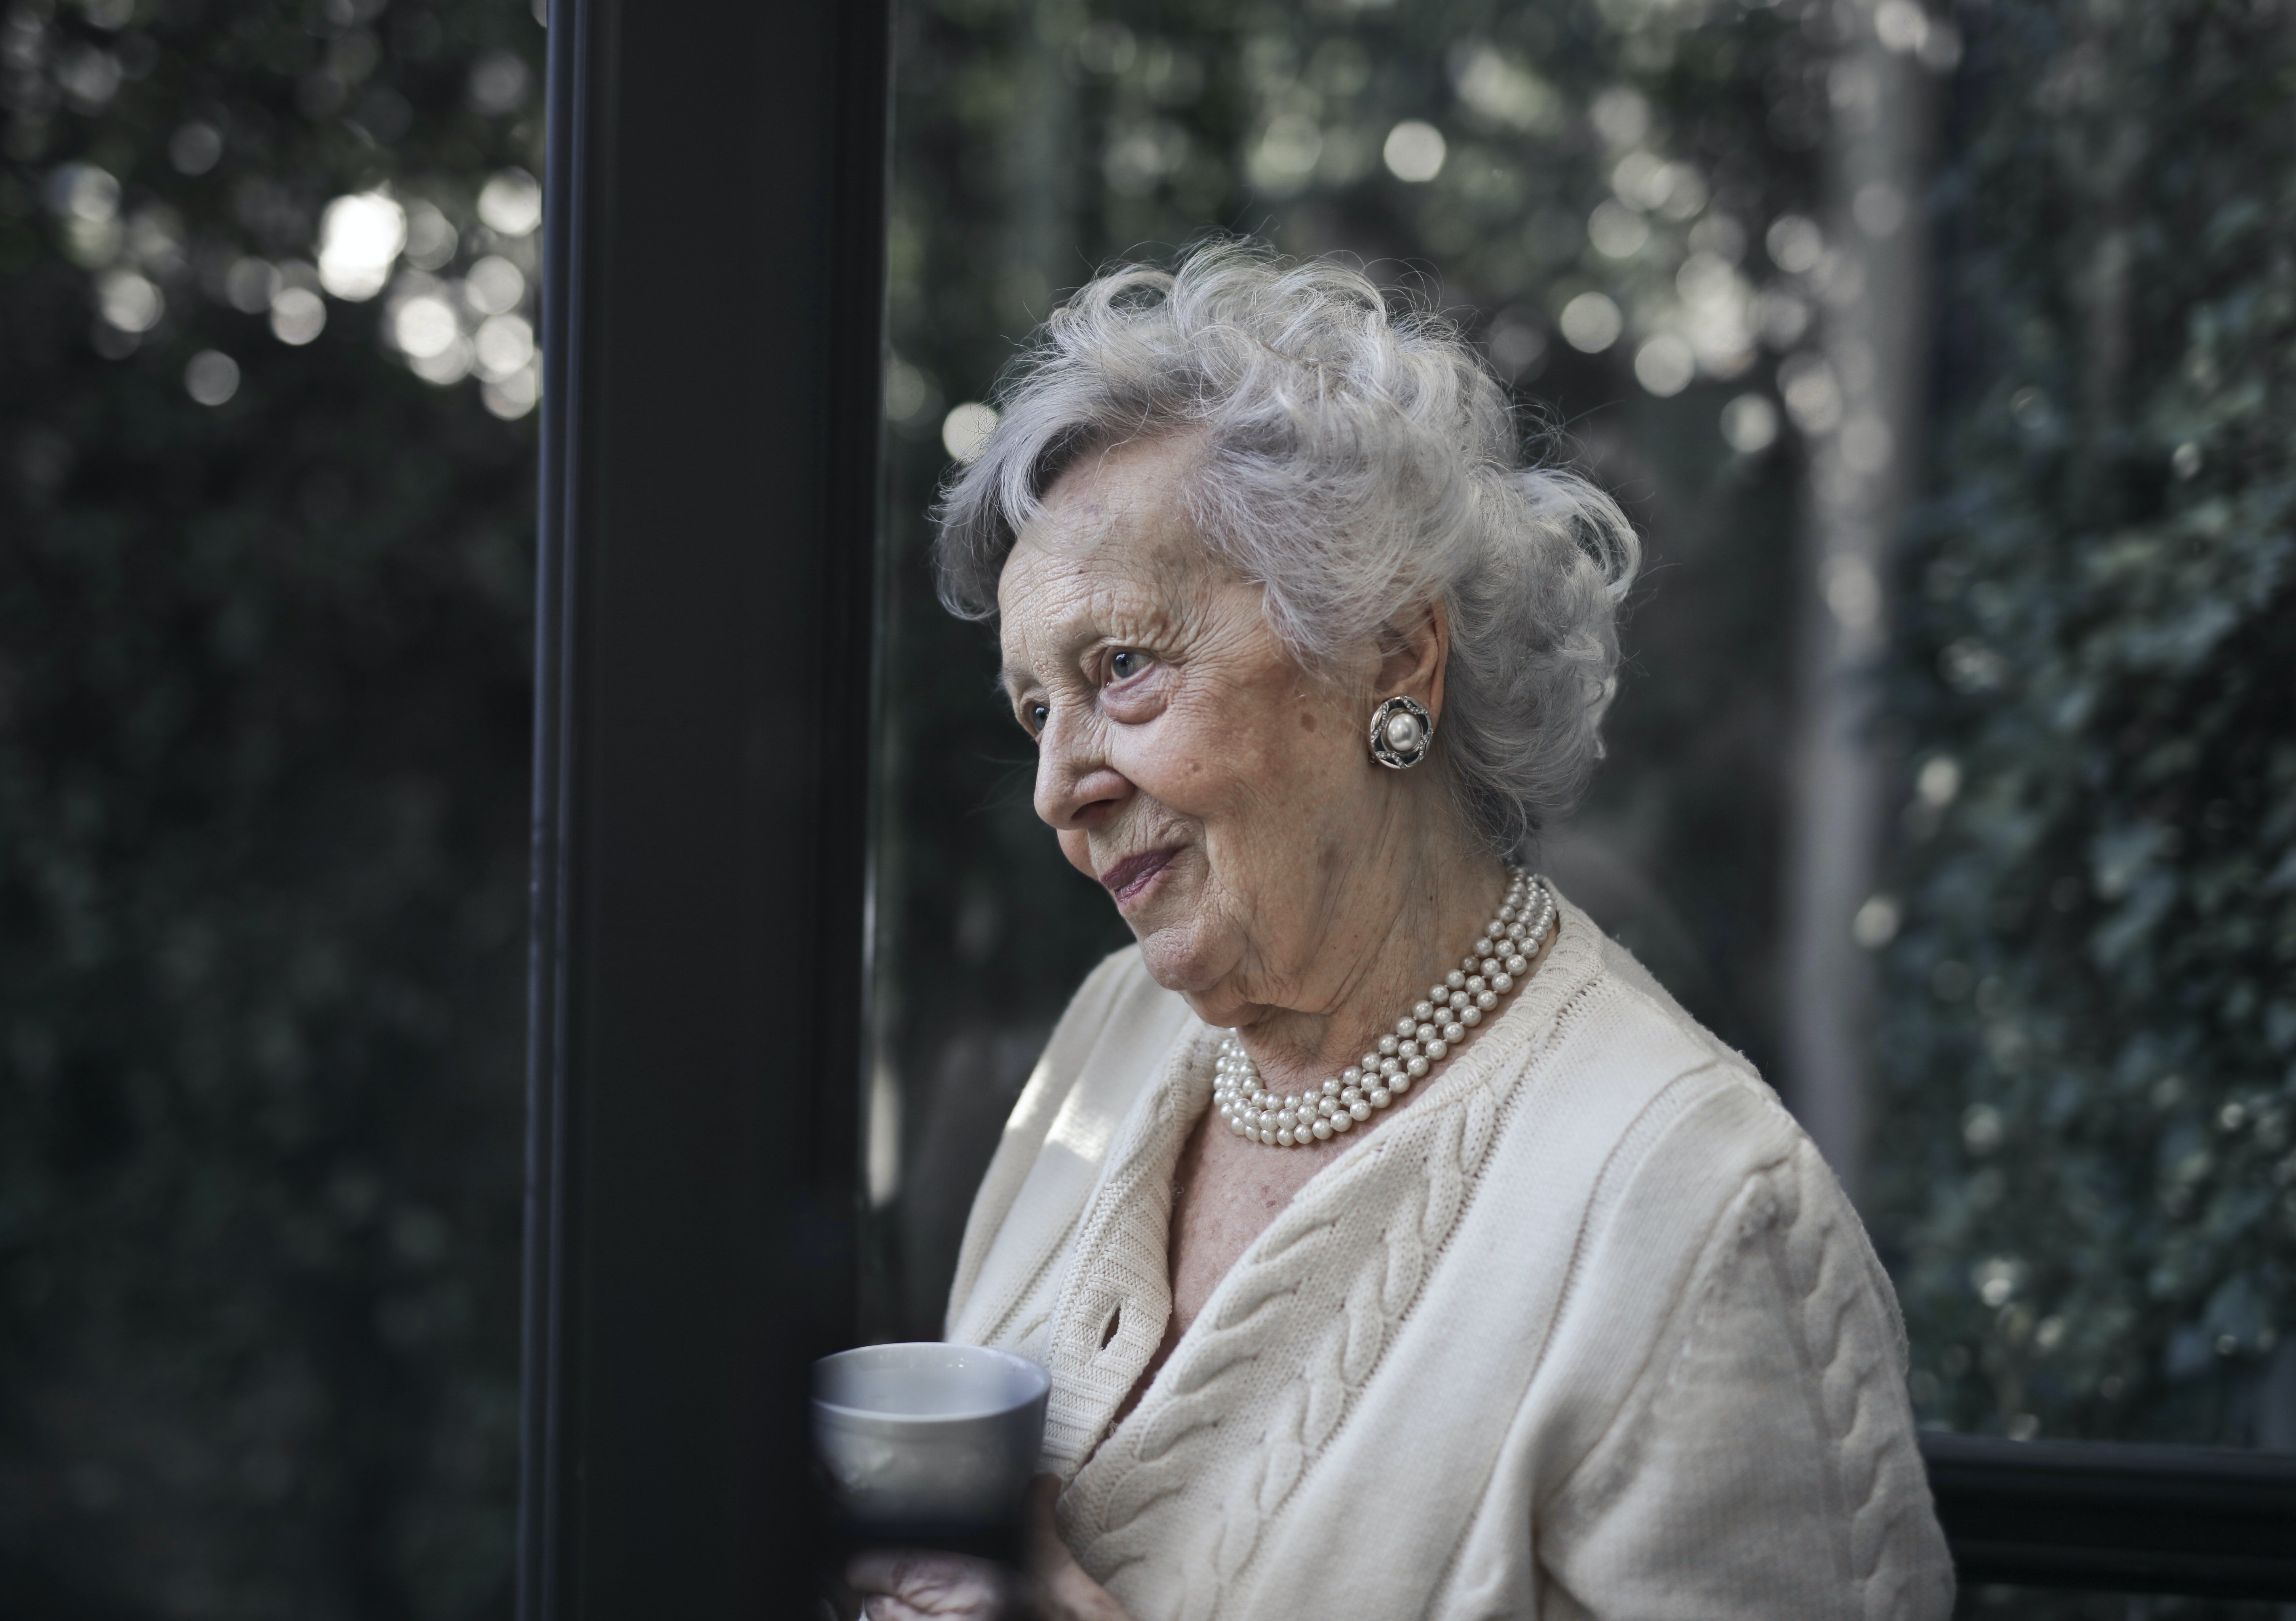 Granny Elizabeth looked out her window sadly, watching her neighbors throw trash on her yard. | Source: Pexels